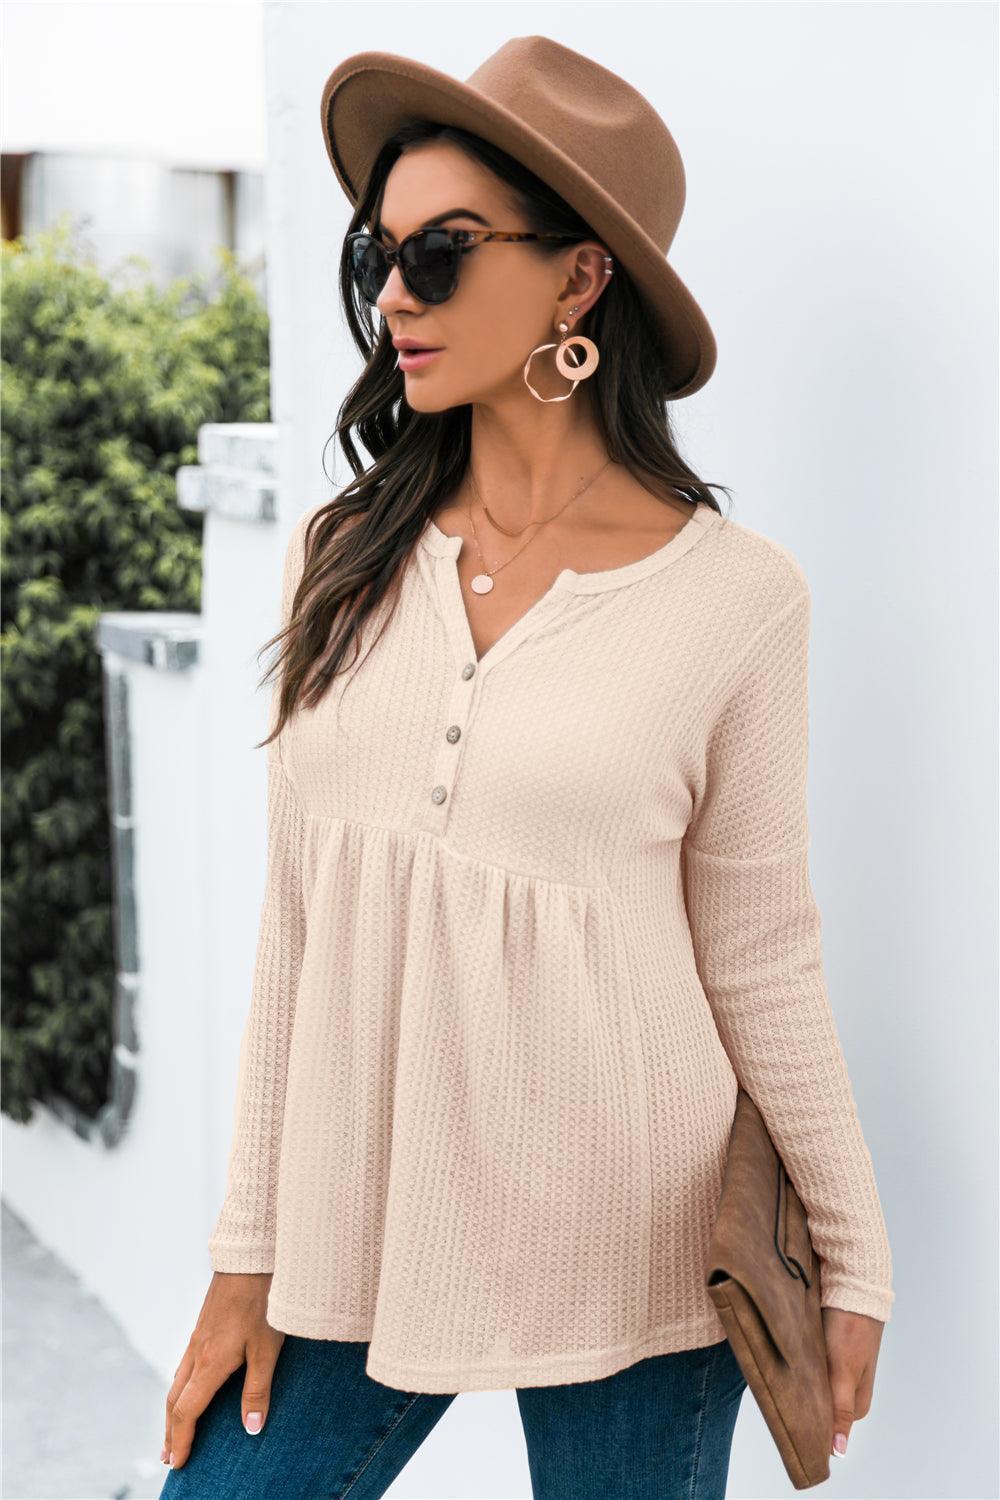 Out of the Ordinary Knit Babydoll Long Sleeve Top - MXSTUDIO.COM